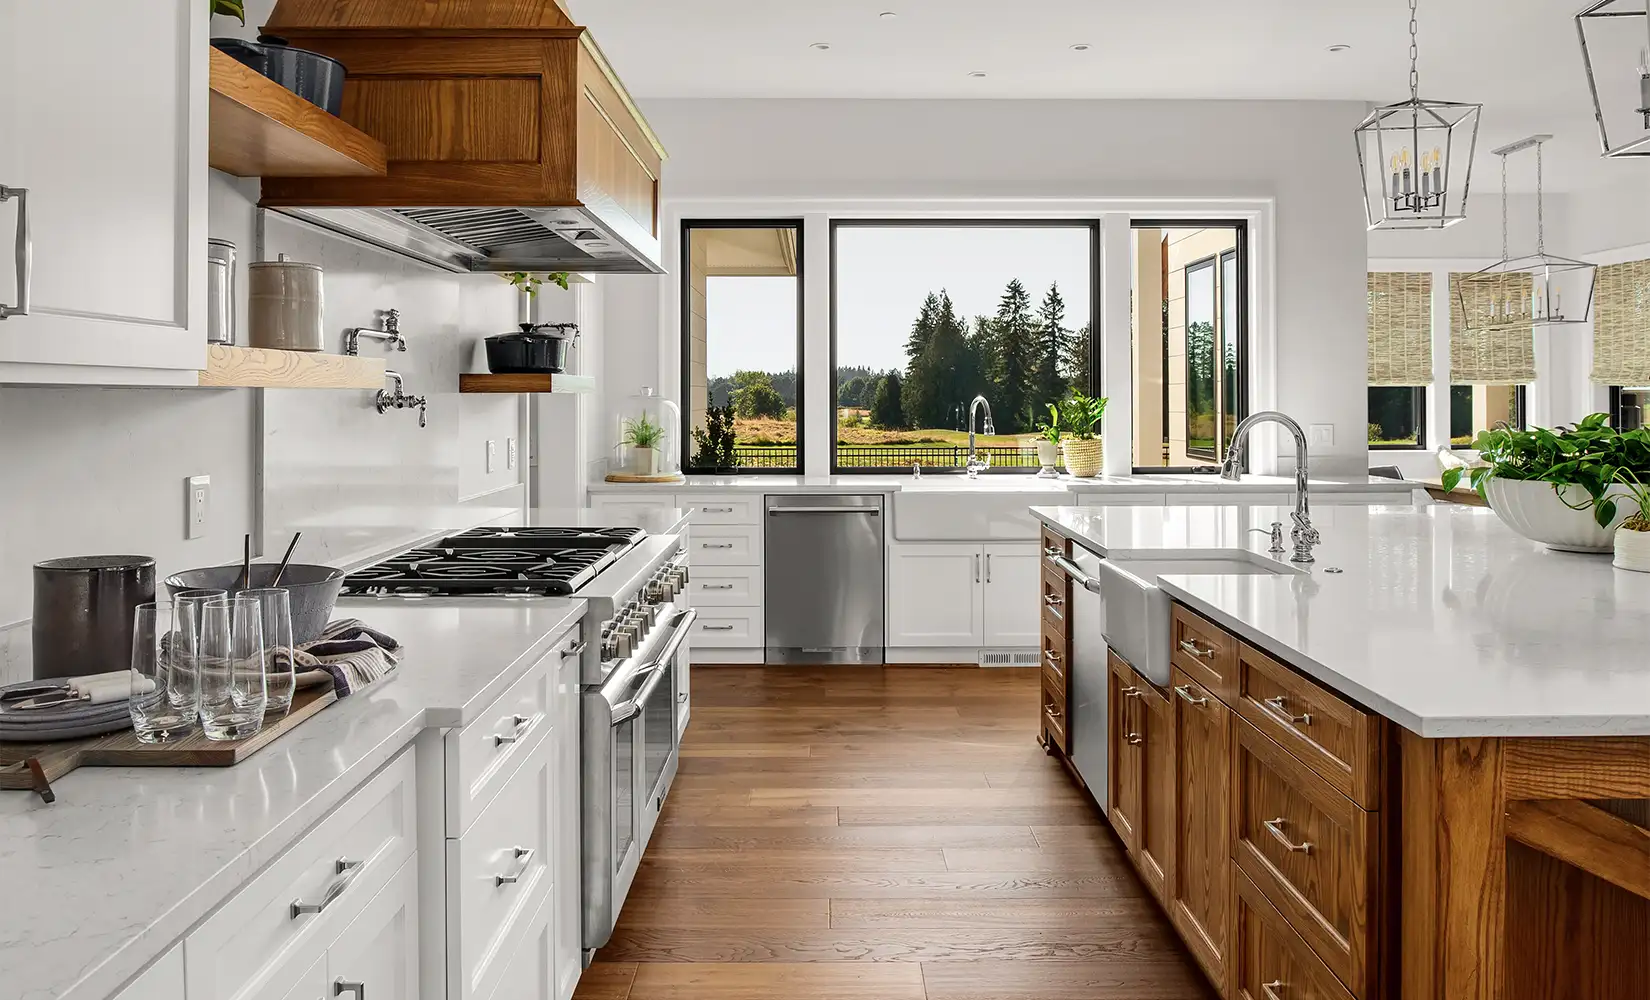 Industrial farmhouse kitchen with wood flooring, white cabinets, wood range hood over oven, and open window.